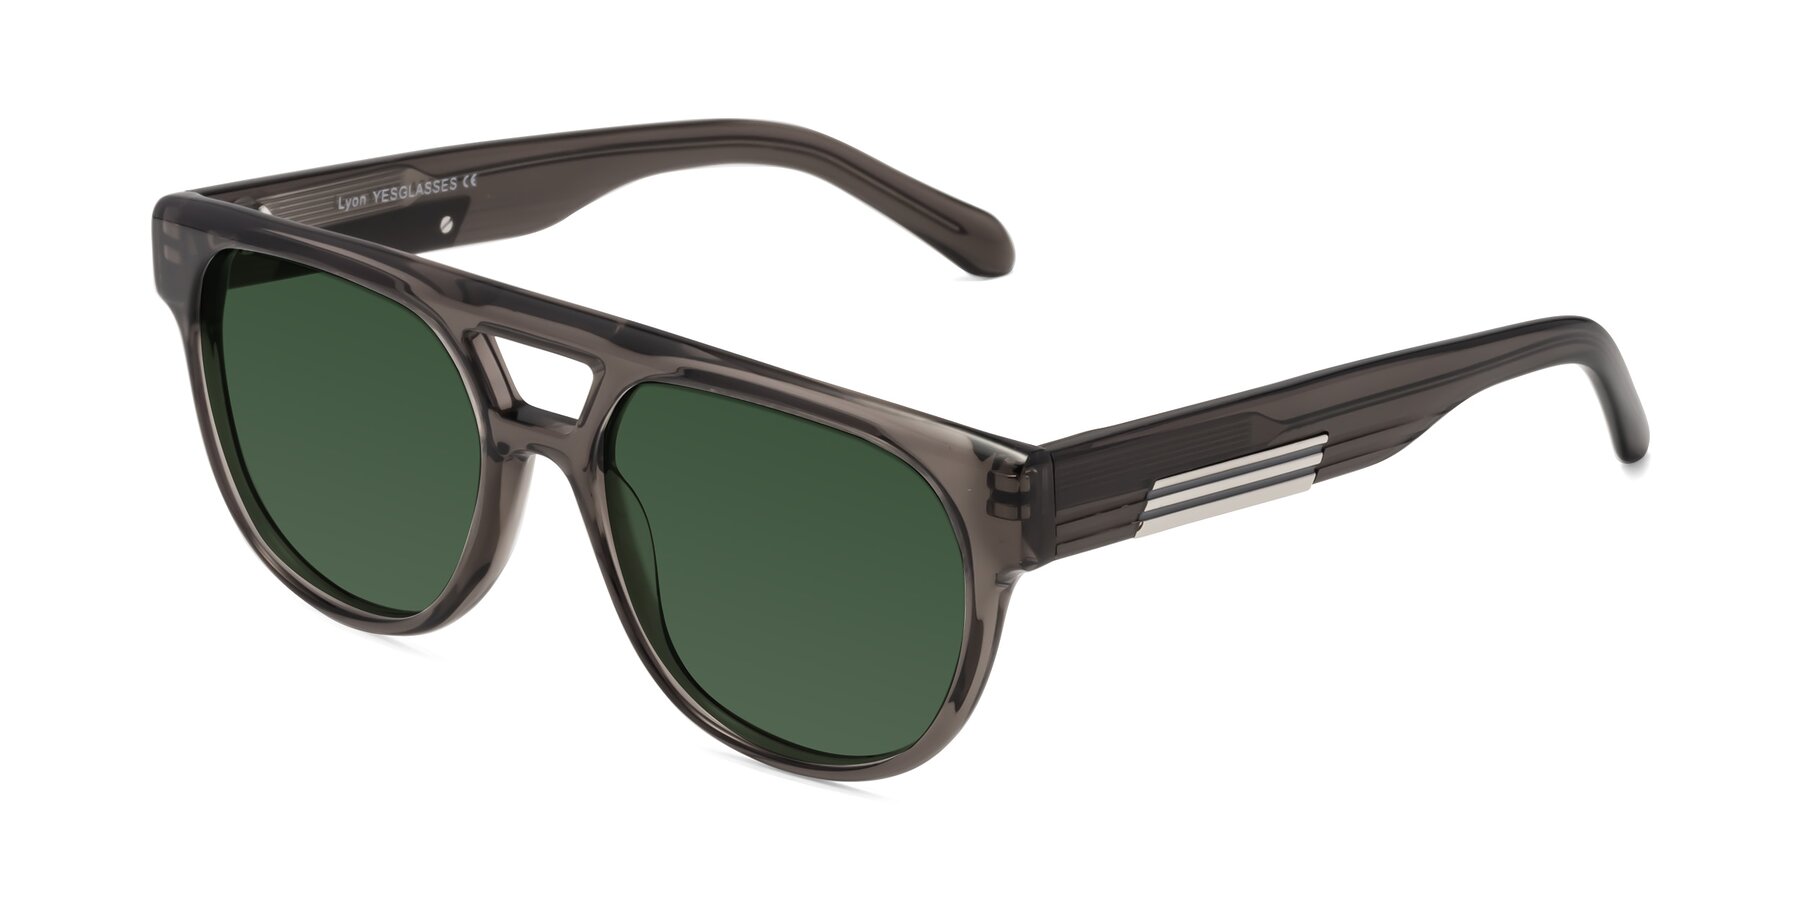 Angle of Lyon in Charcoal Gray with Green Tinted Lenses